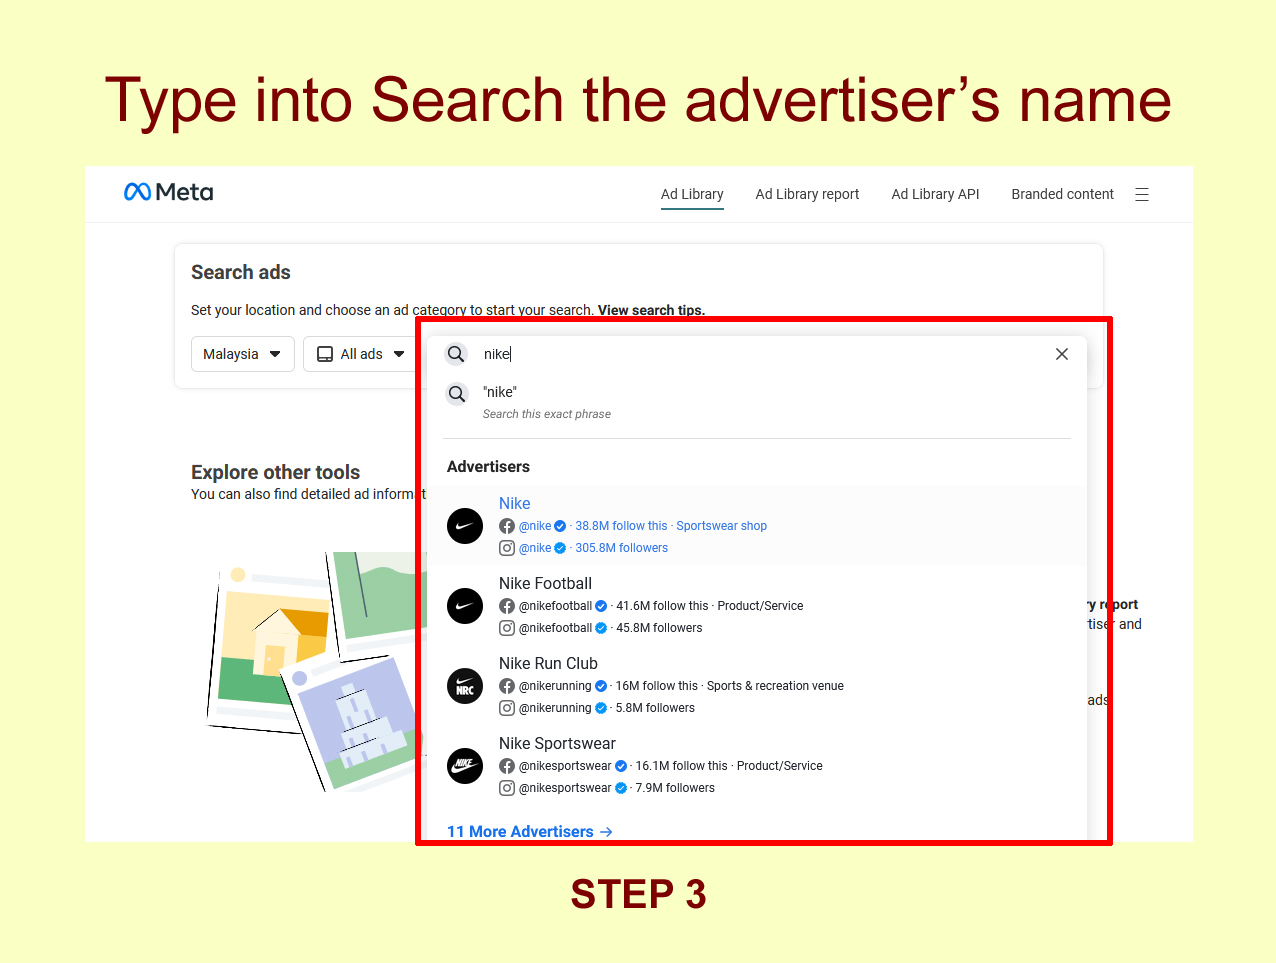 Step 3 - Search Advertiser's Name